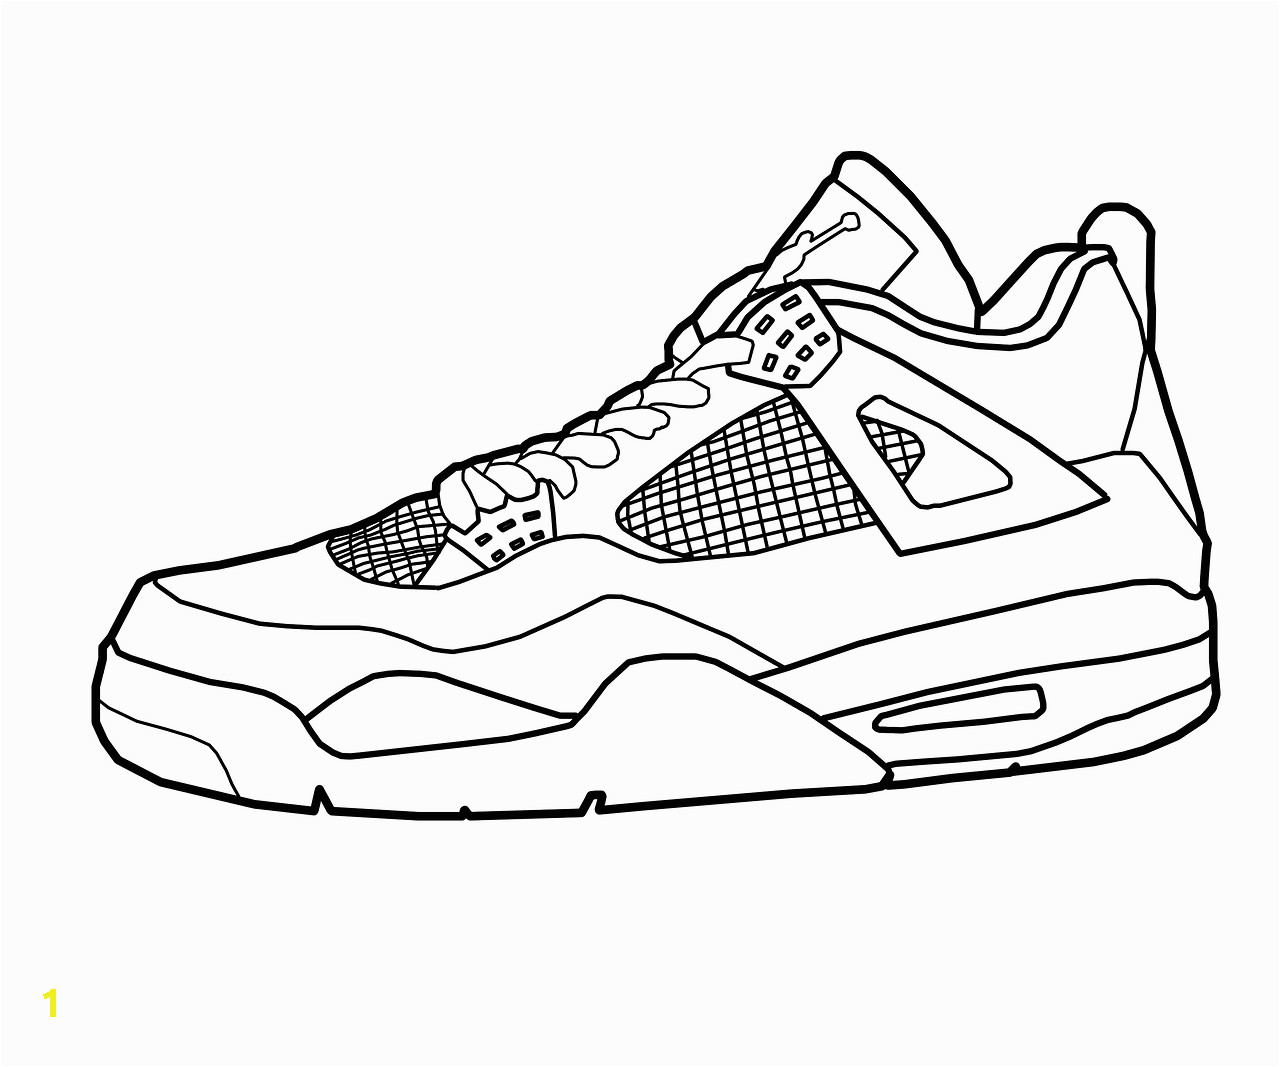 3303bef a92bb ed8f4a 28 collection of air jordan 4 drawing high quality free 1280 1067